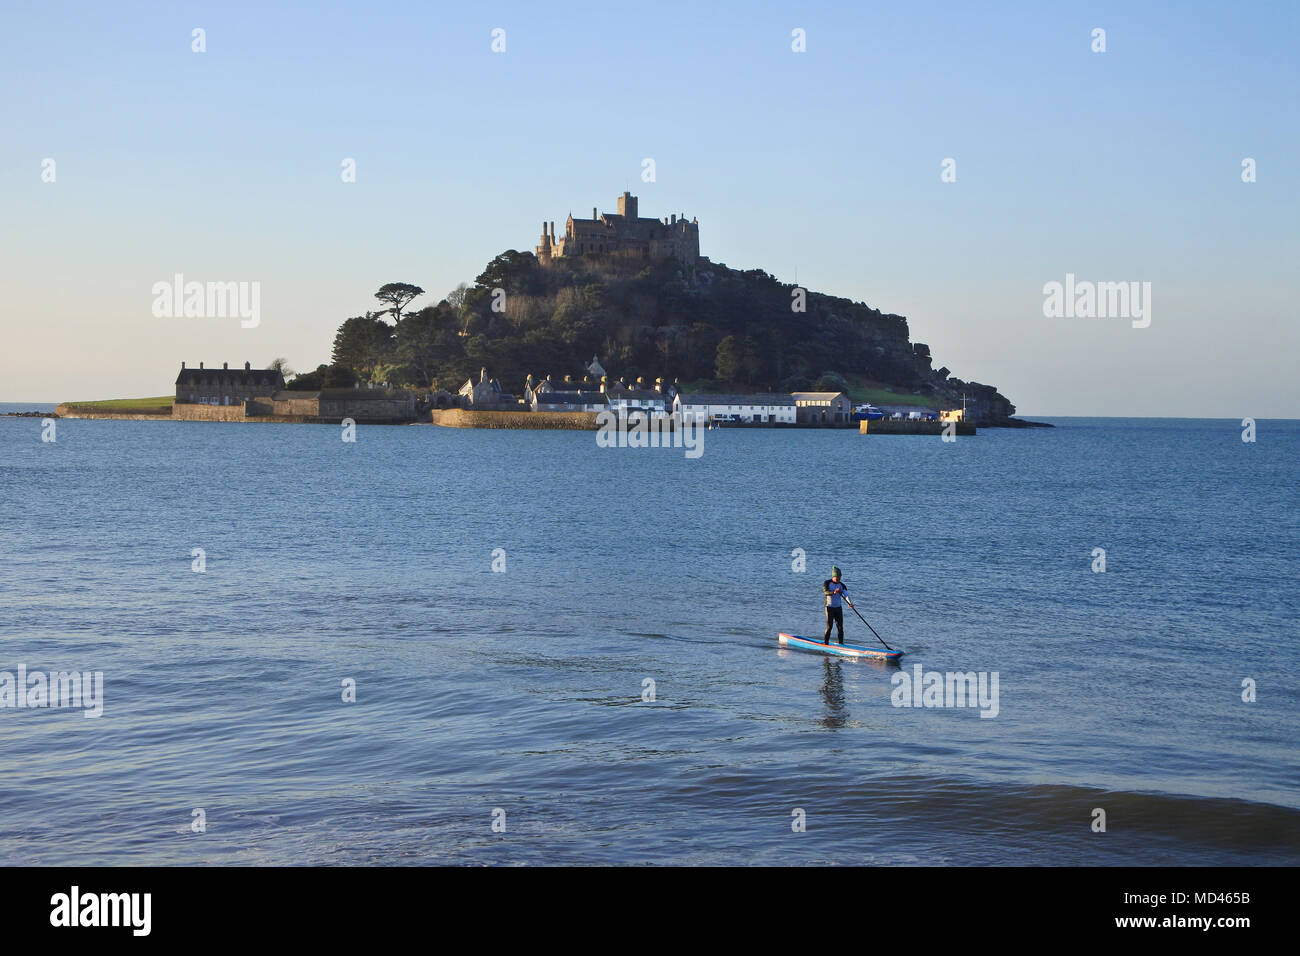 A single paddle boarder in front of St. Michael's Mount, Marazion, Cornwall, UK - John Gollop Stock Photo